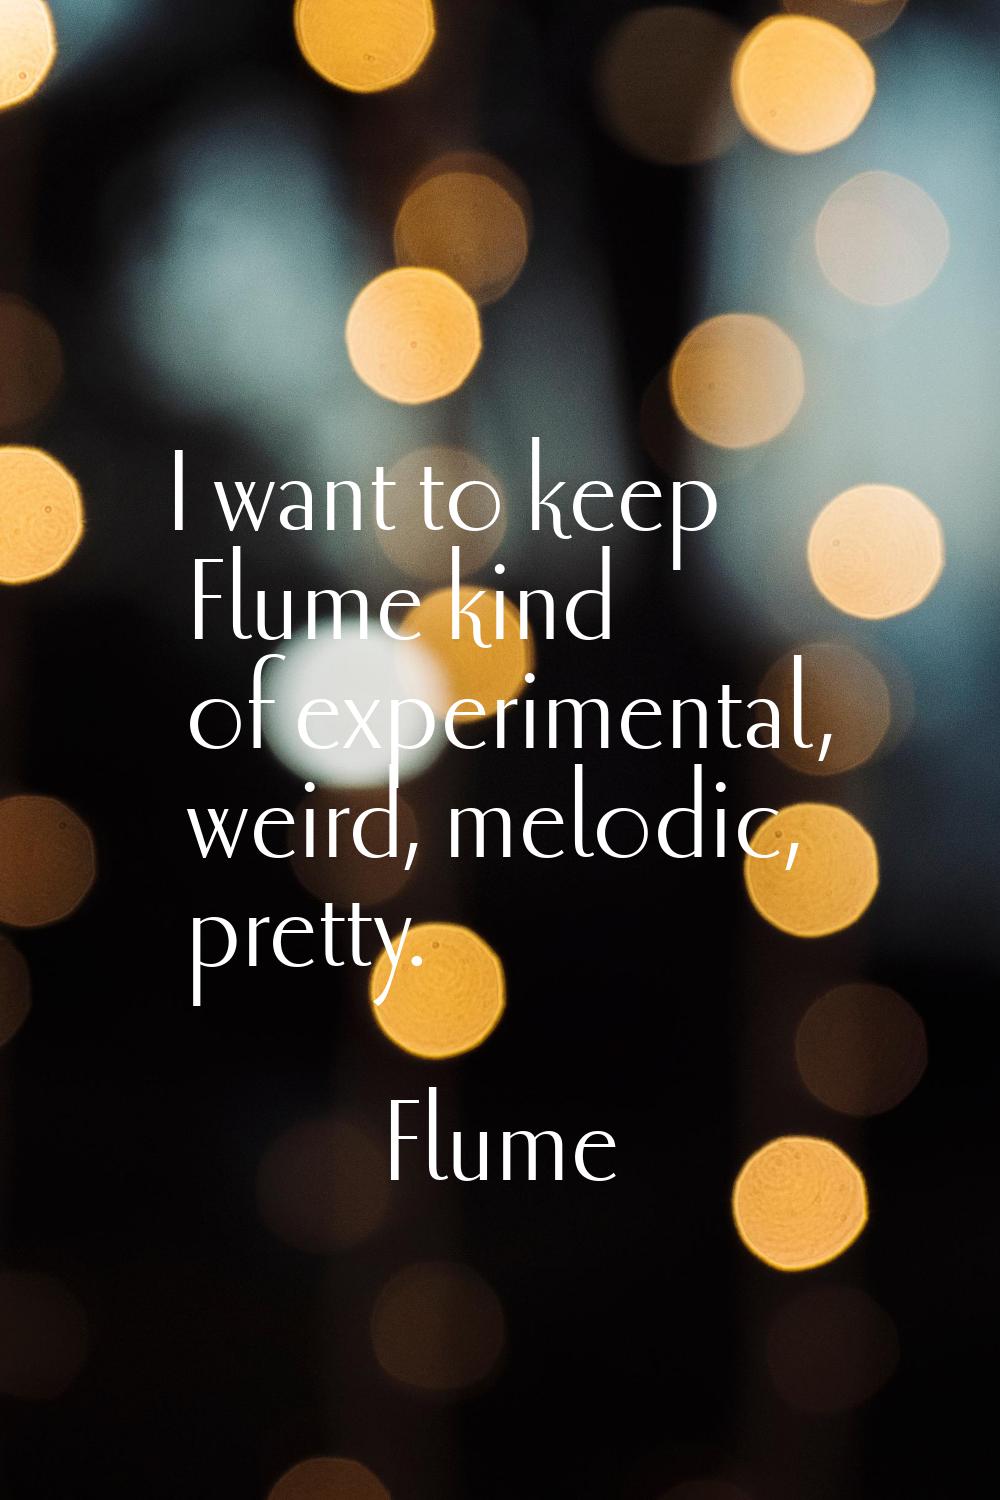 I want to keep Flume kind of experimental, weird, melodic, pretty.